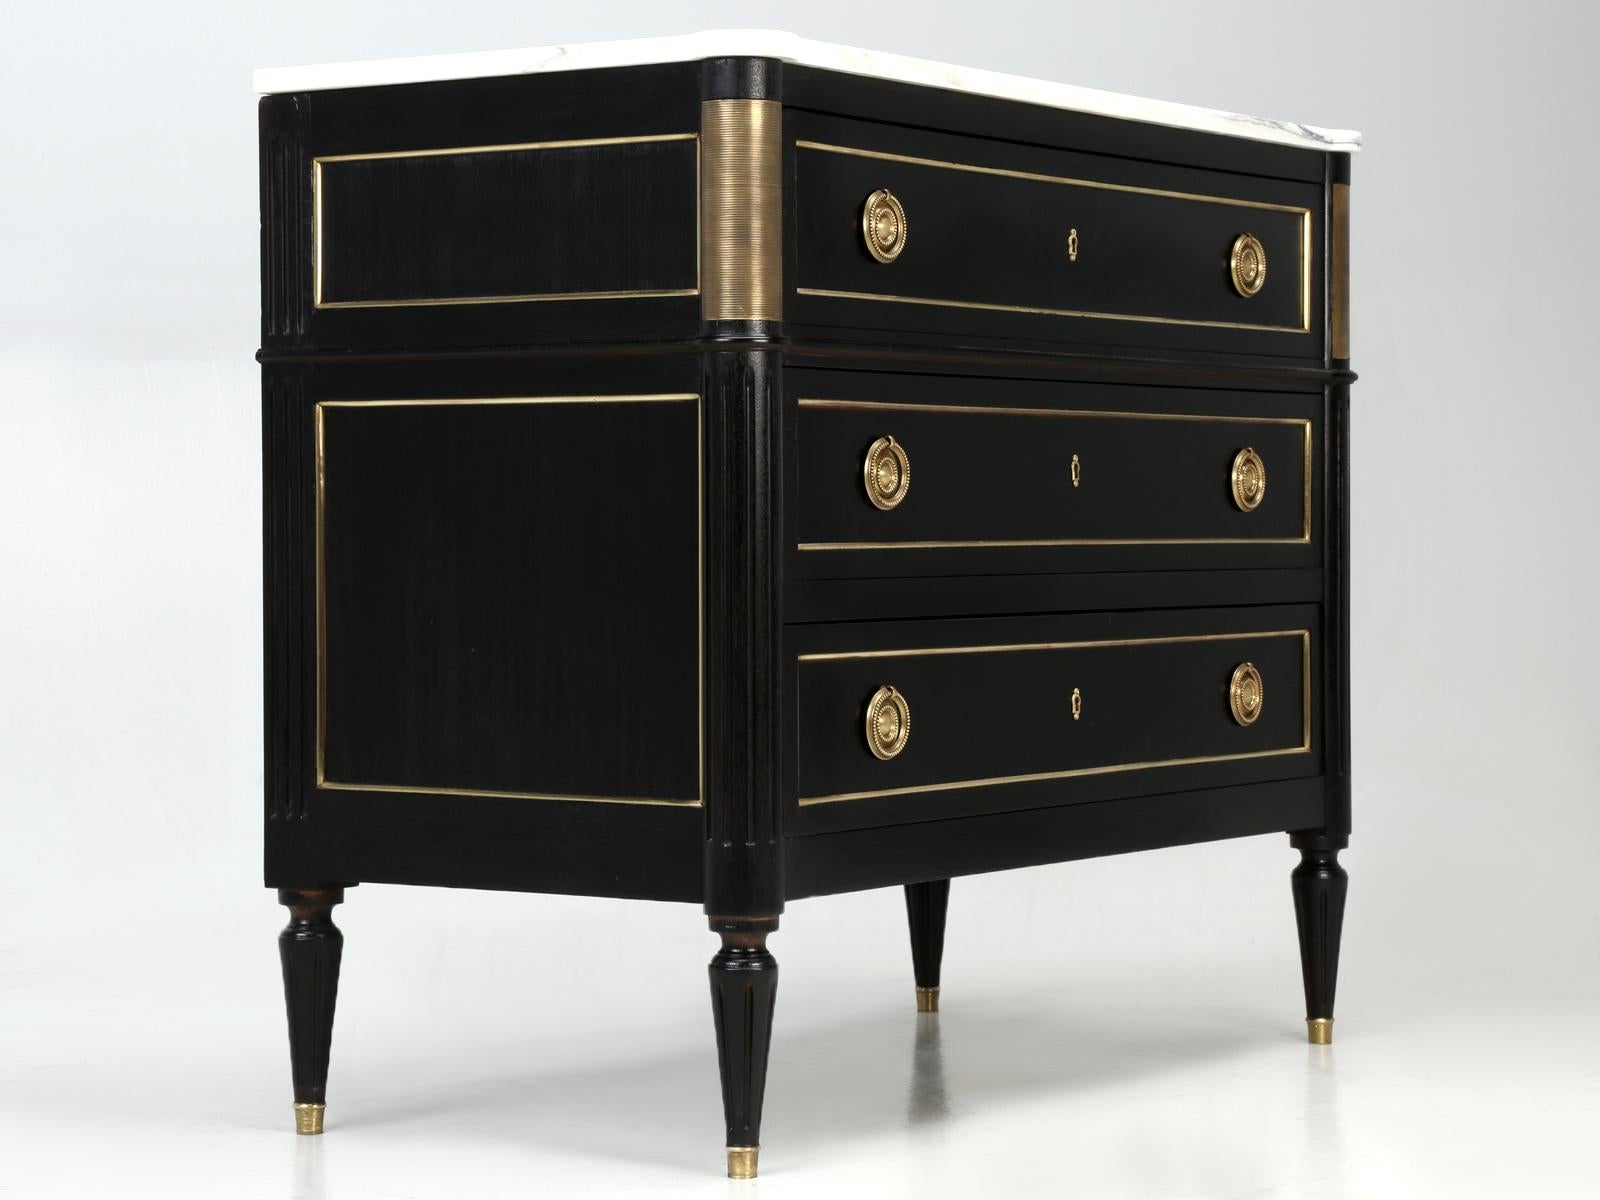 Antique French Louis XVI style commode, that our in-house Old Plank restoration department hand stripped, using no dangerous chemicals and then applied an old-world ebonized finish. This is not your typical mid-20th century commode, with a thin